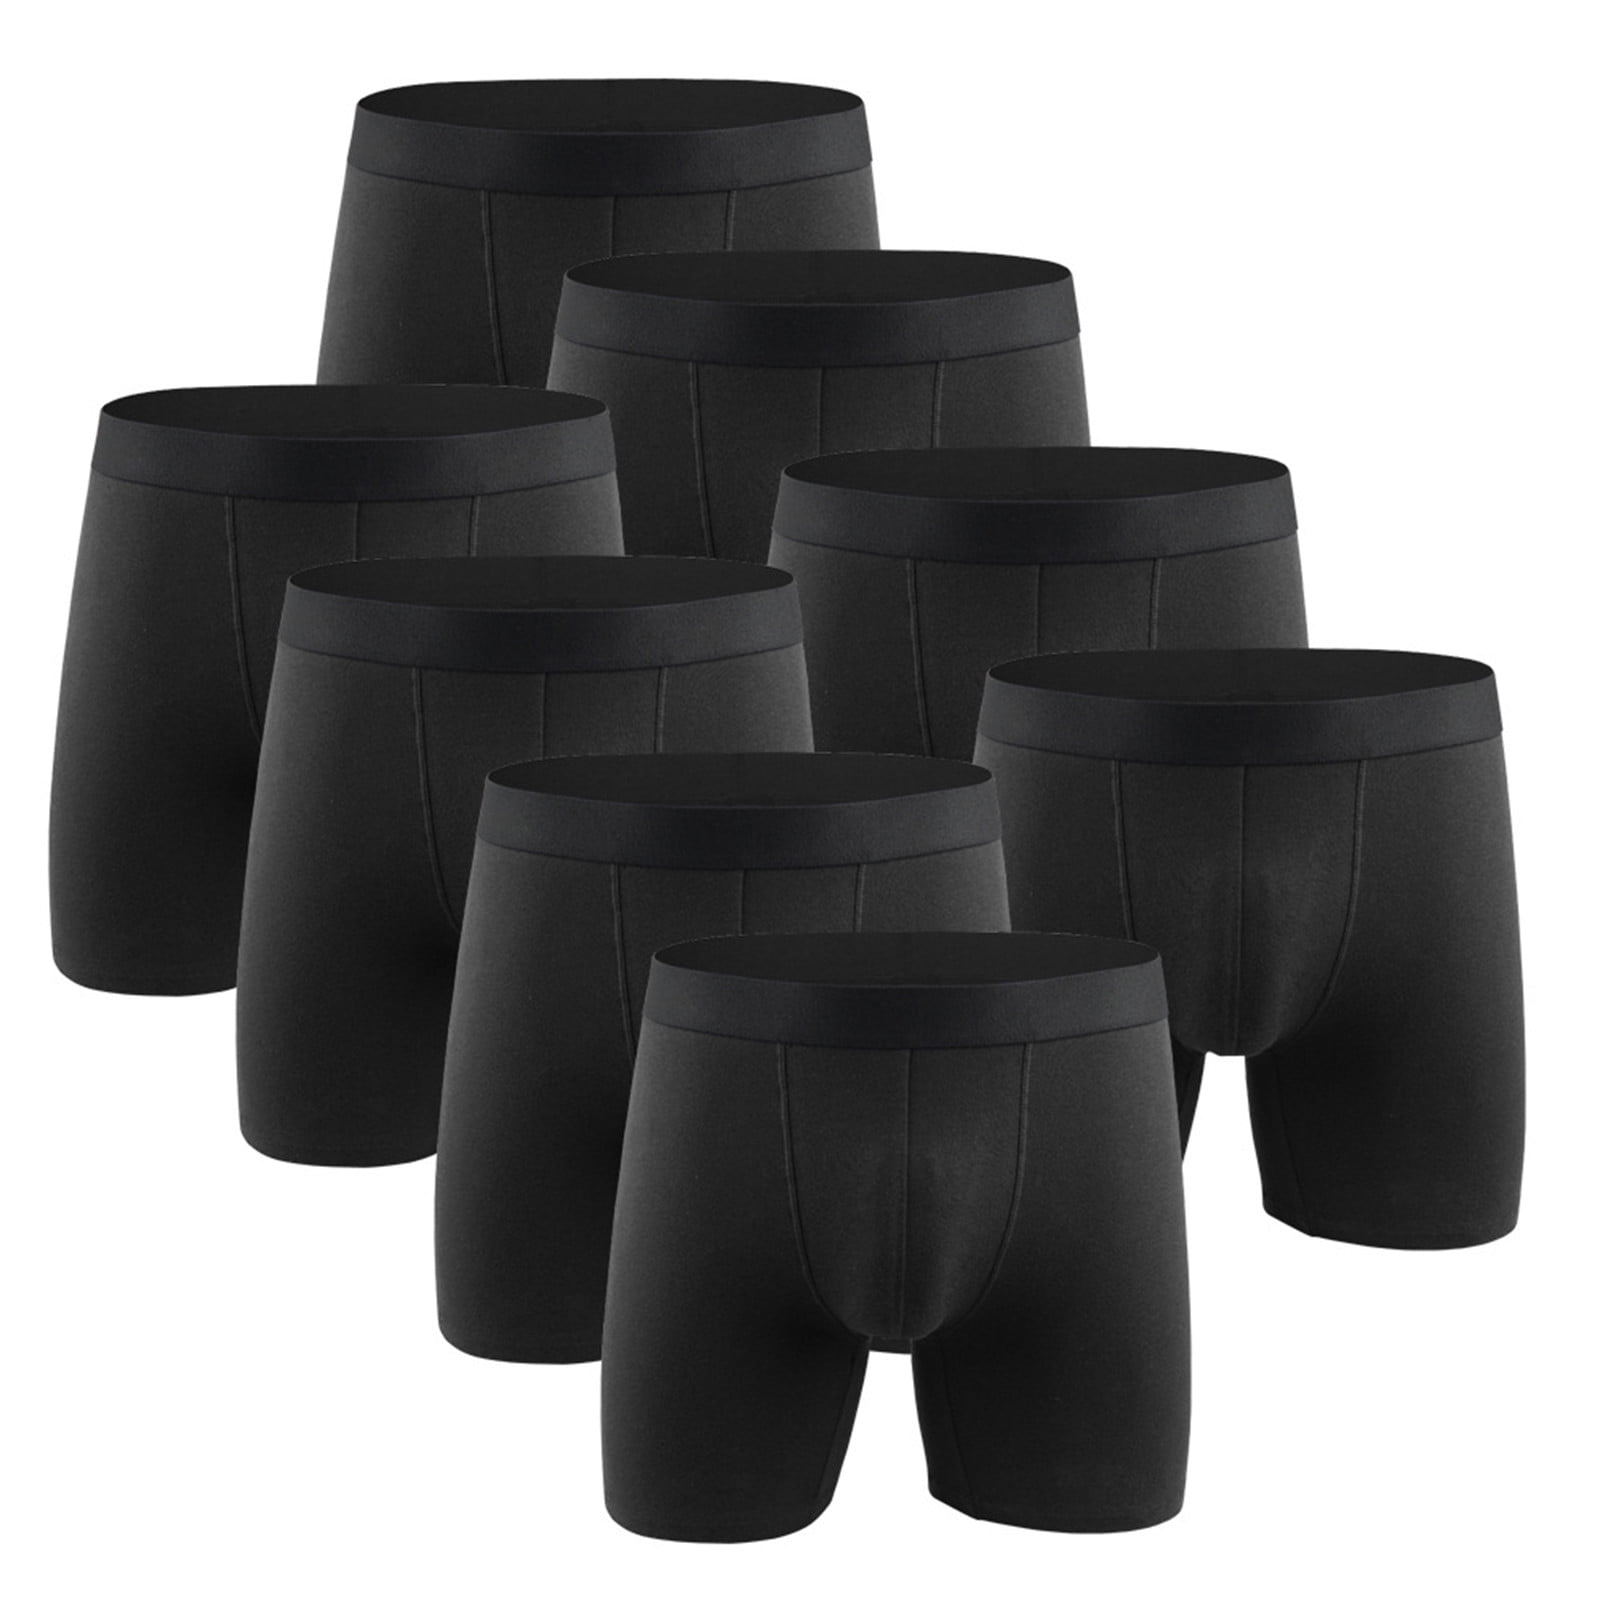 Pair of Thieves Men's Solid 3 Pack Brief, Black, Small at